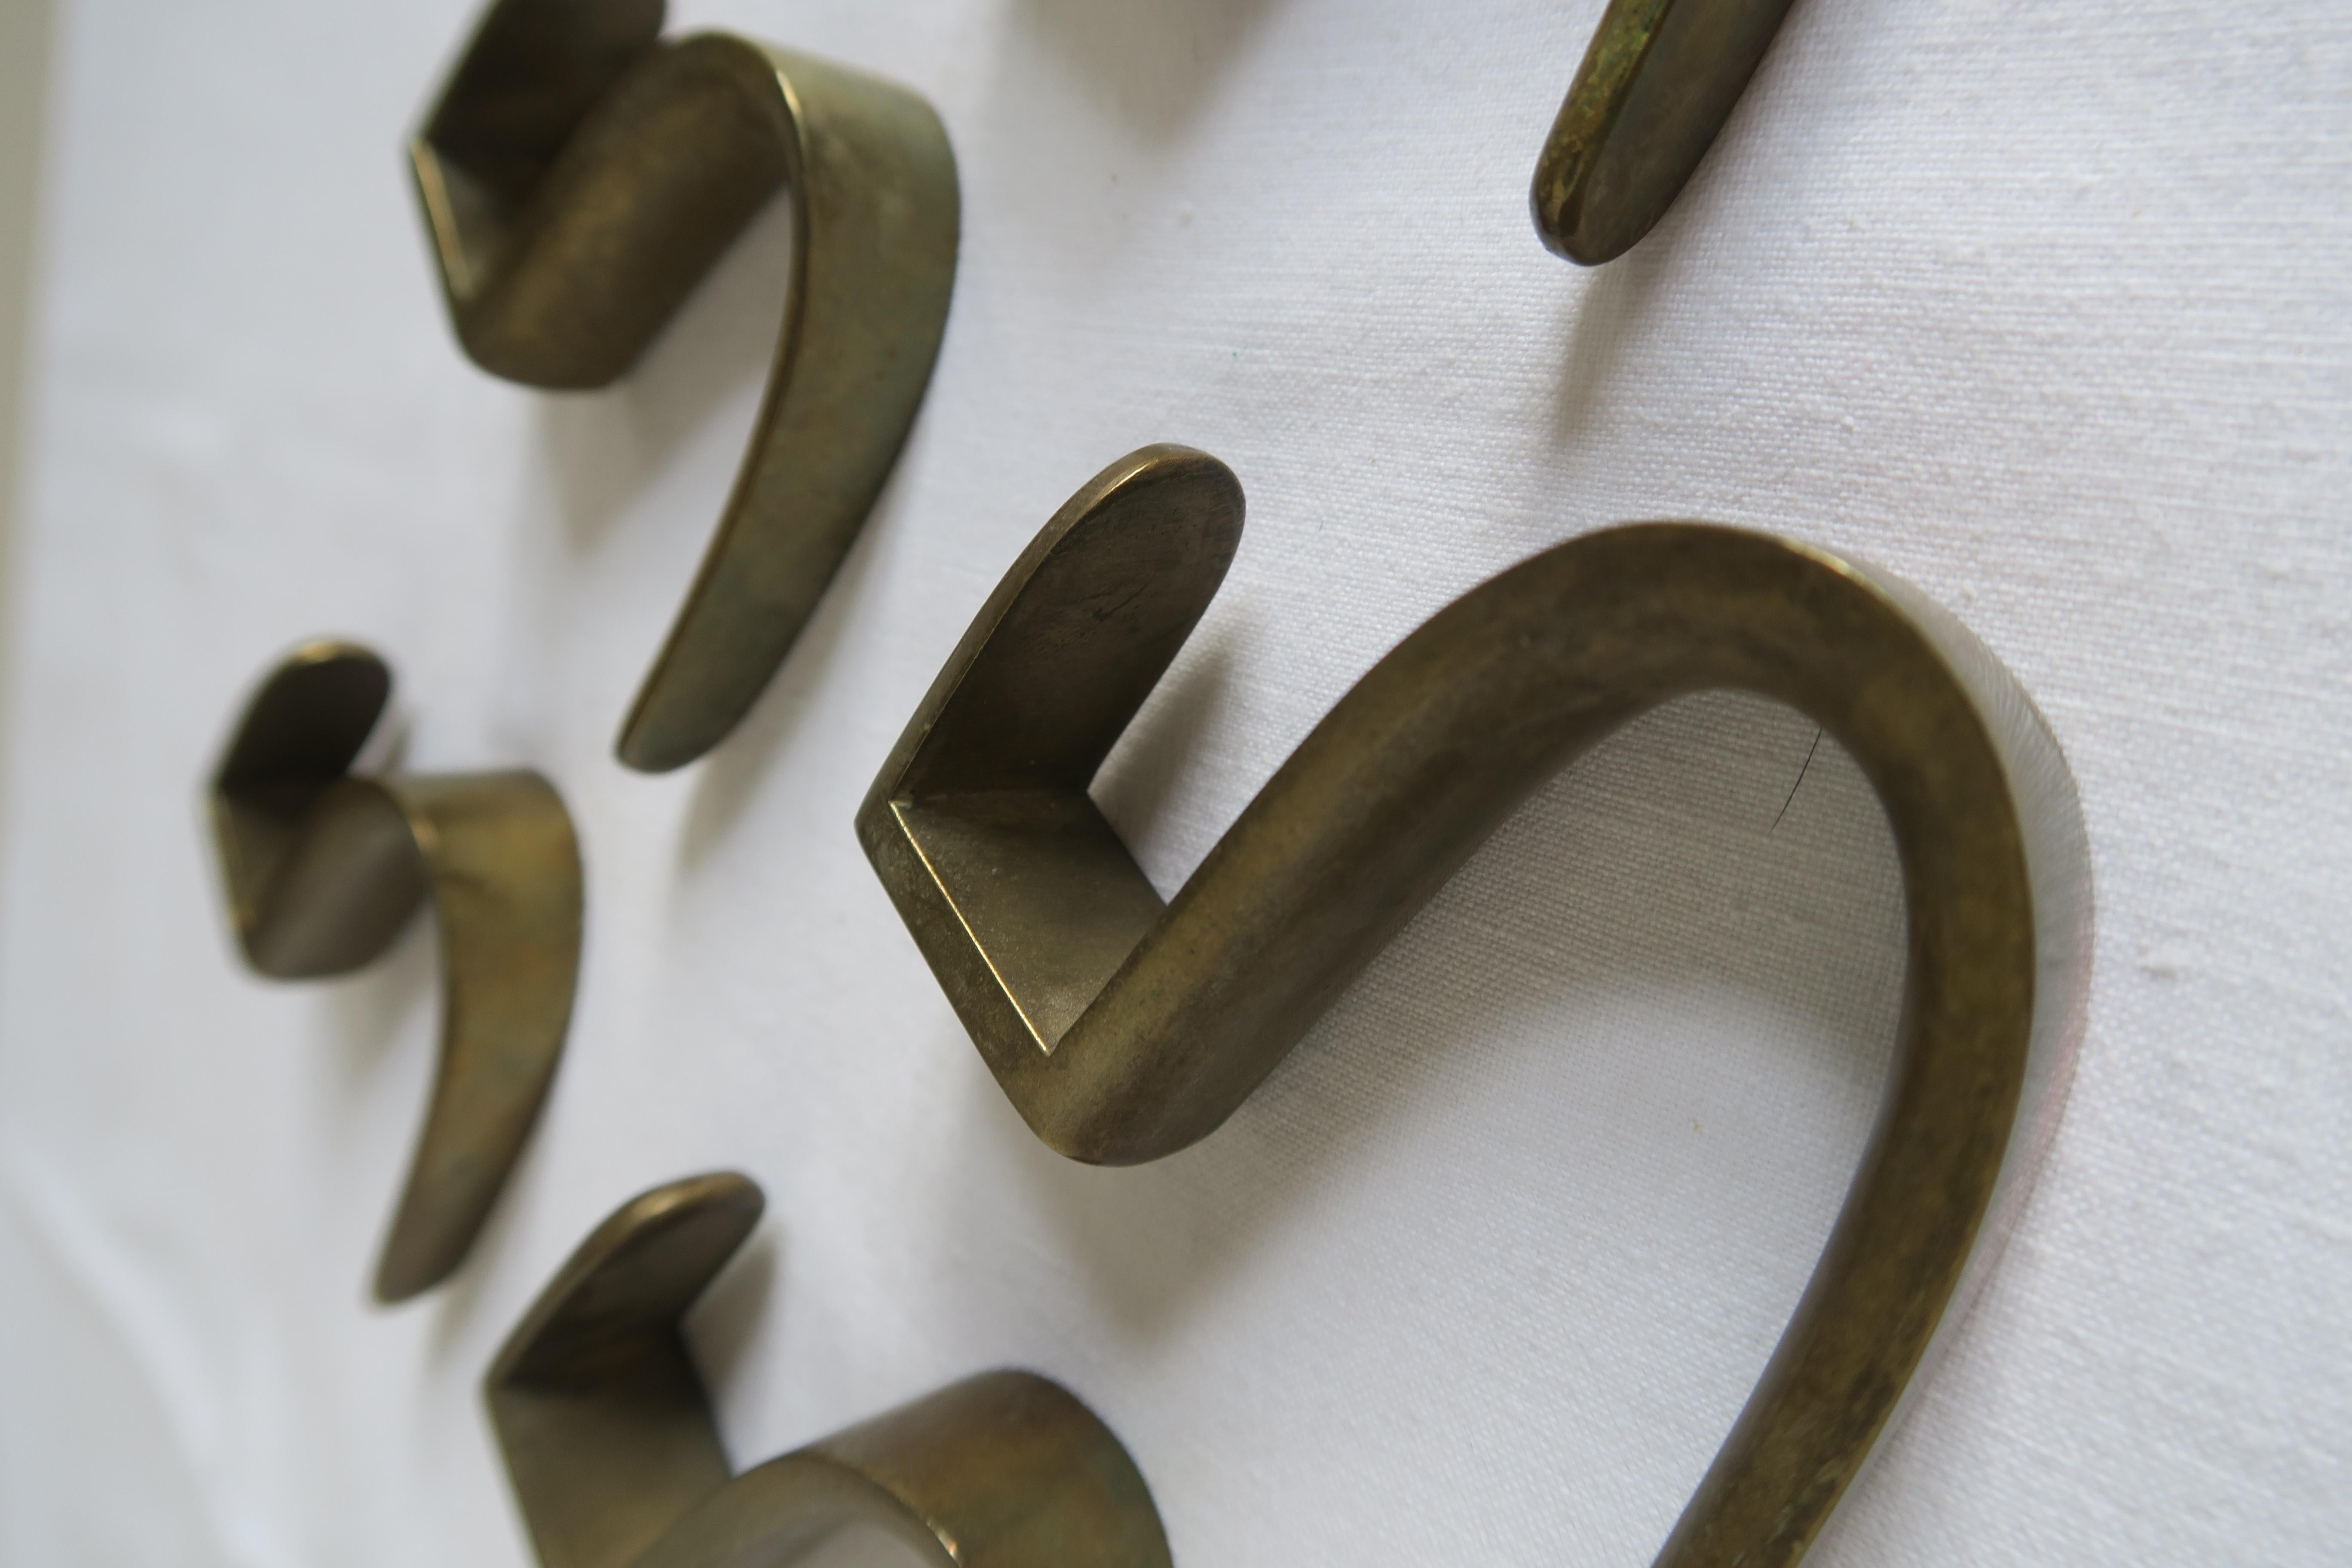 On offer are 5 massive brass coat hooks. They were designed by Carl auböck in the 1950s and produced manually by his infamous Austrian Werkstätte.
Their shape is beautifully sloped and all the edges are rounded. Time has given them a unique